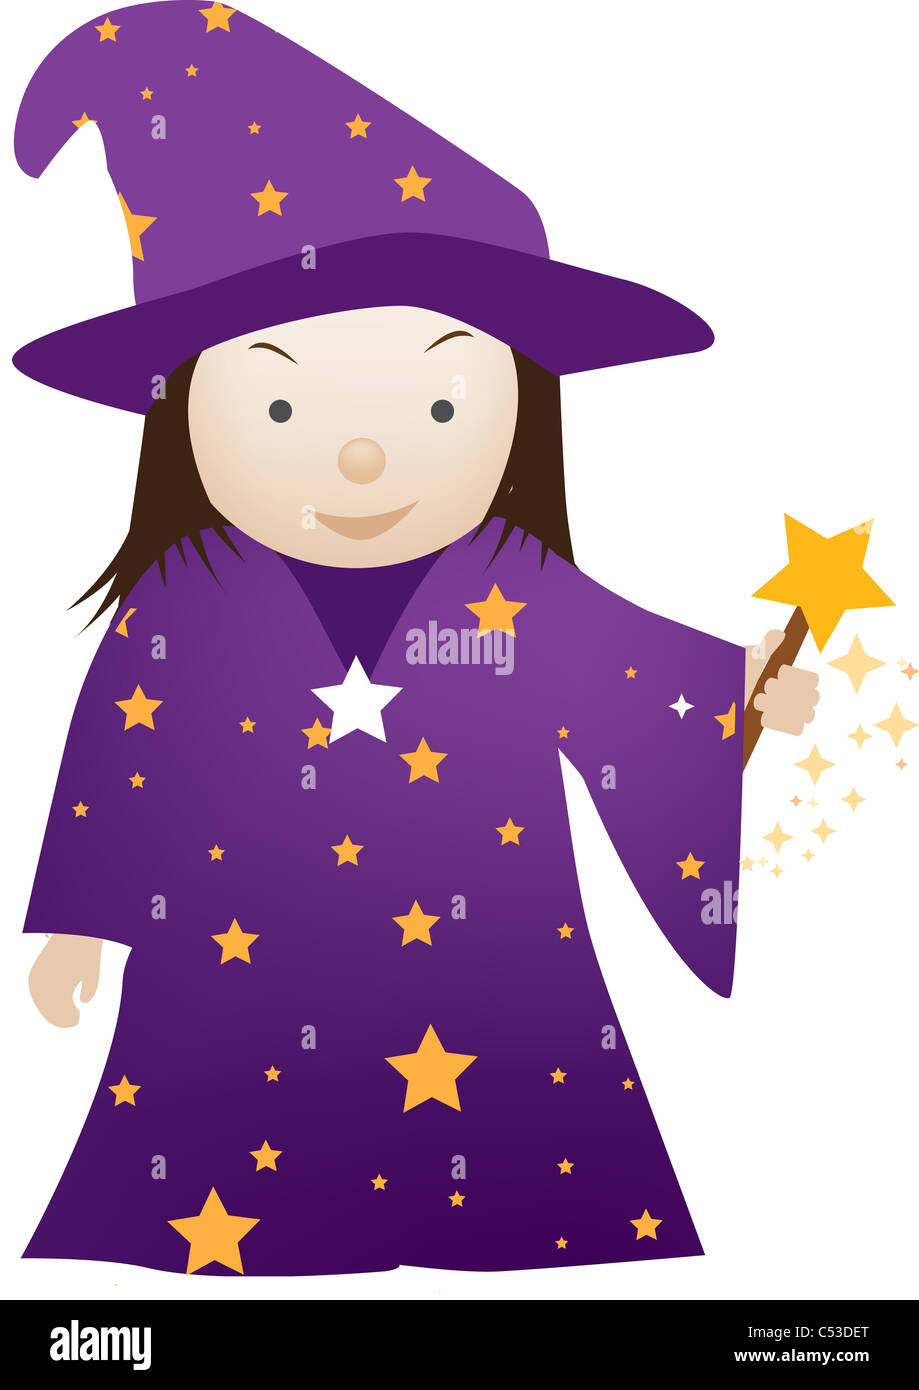 illustration of a little child dressed up as a wizard Stock Photo